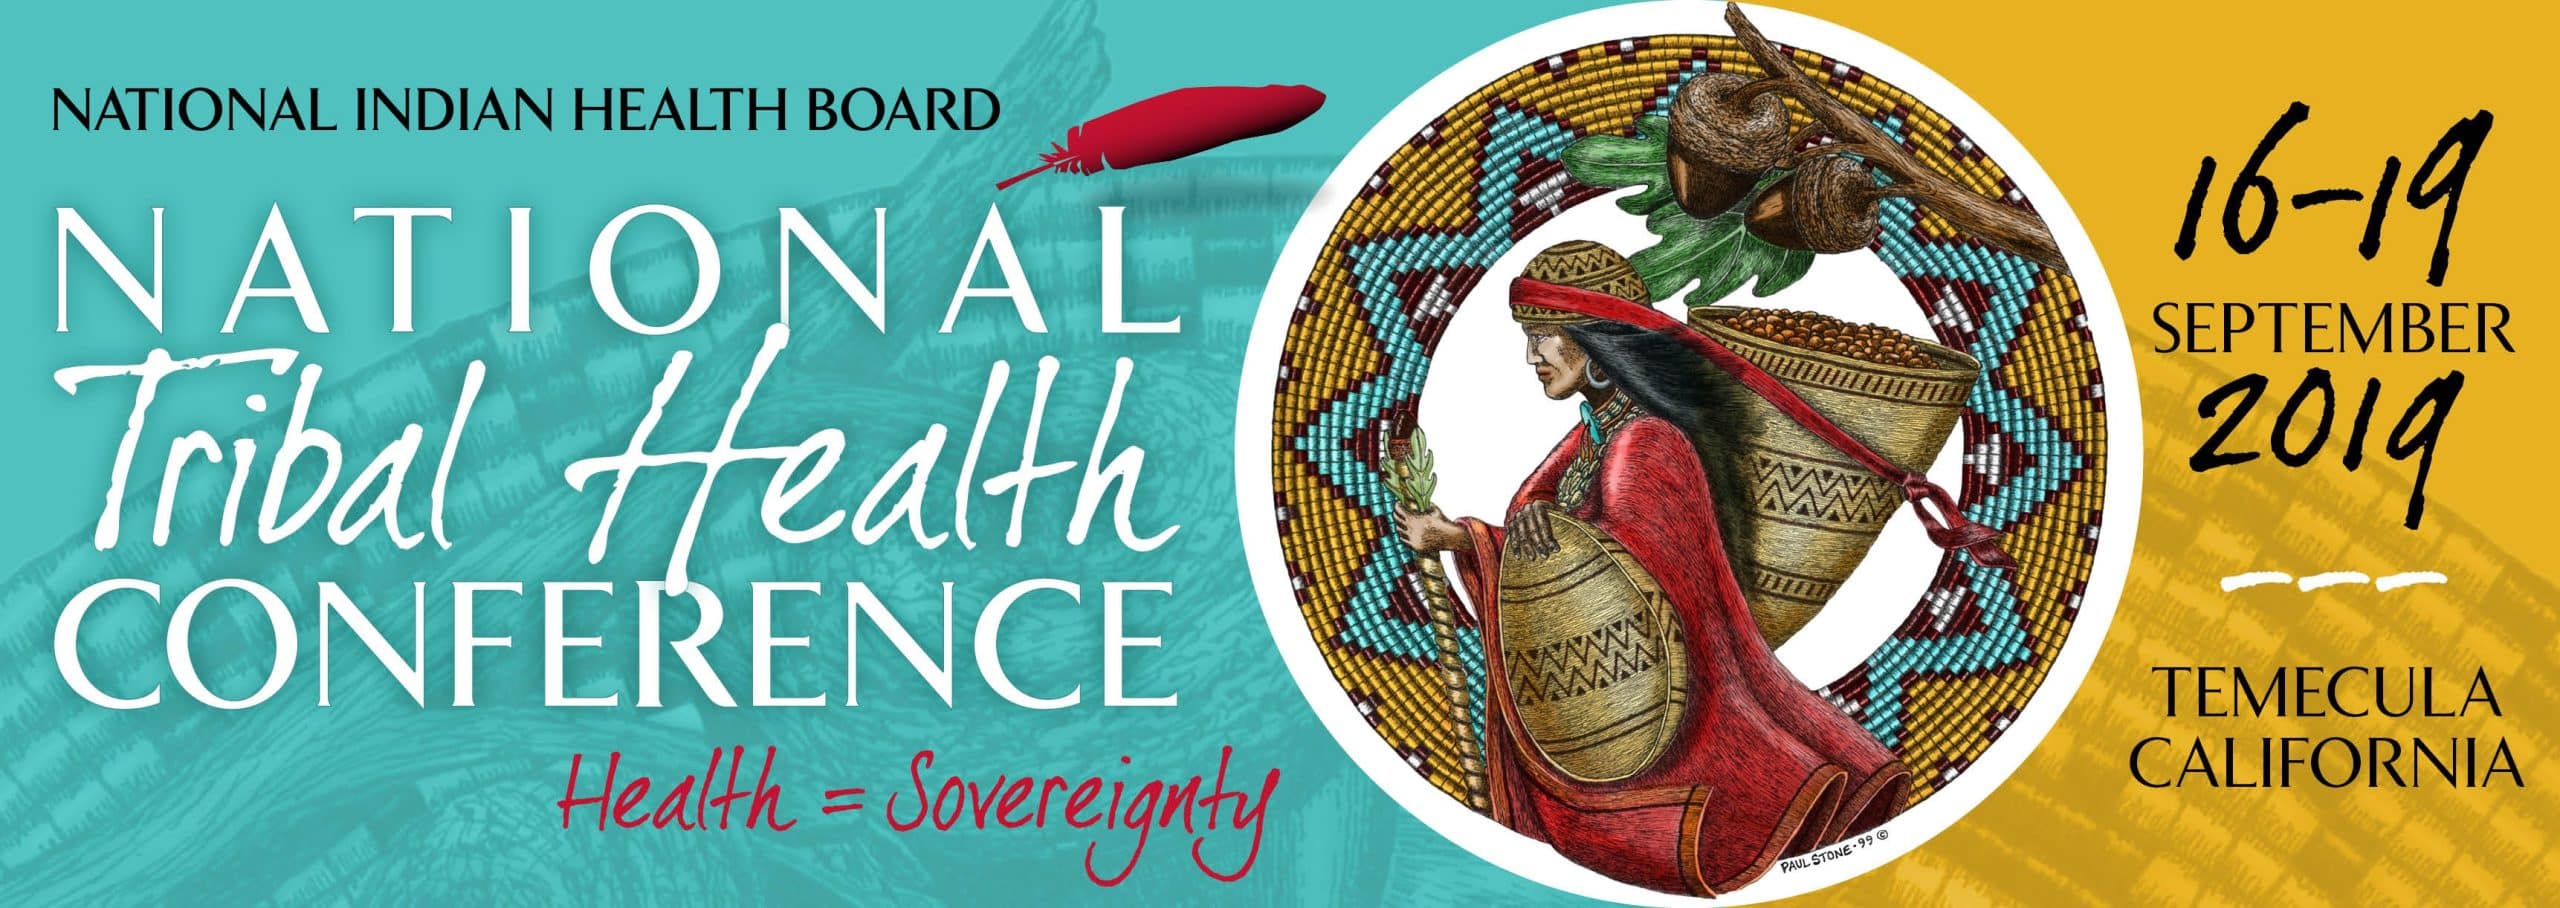 The 36th Annual National Tribal Health Conference